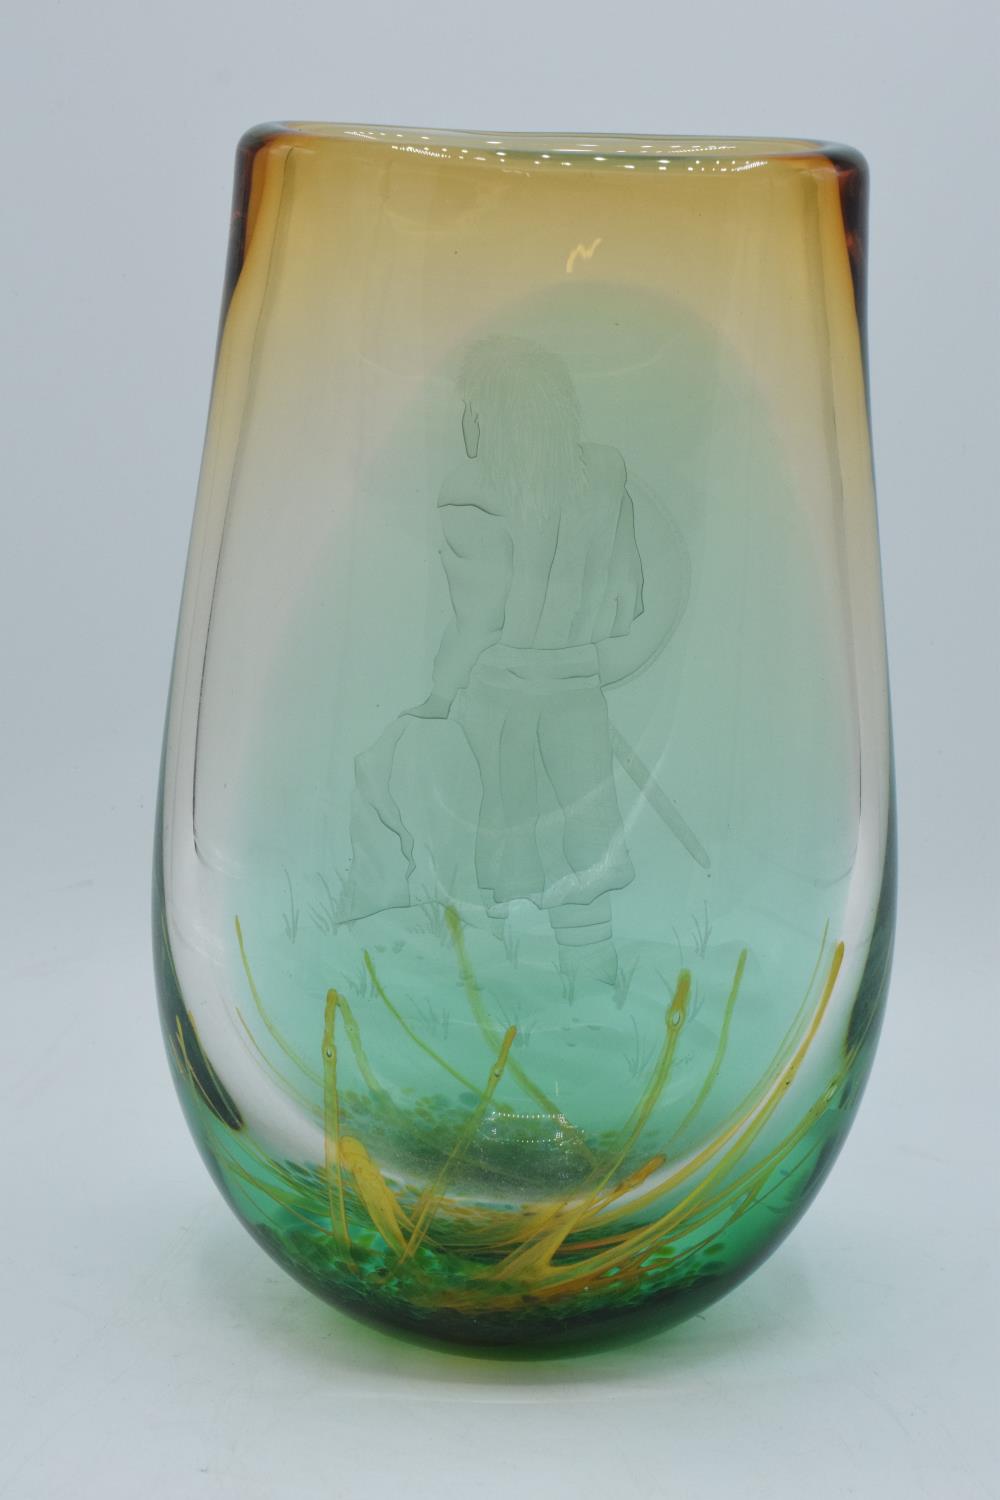 Caithness one-off glass vase 'Highlander' 2002, signed to base by the artist. 27cm tall.